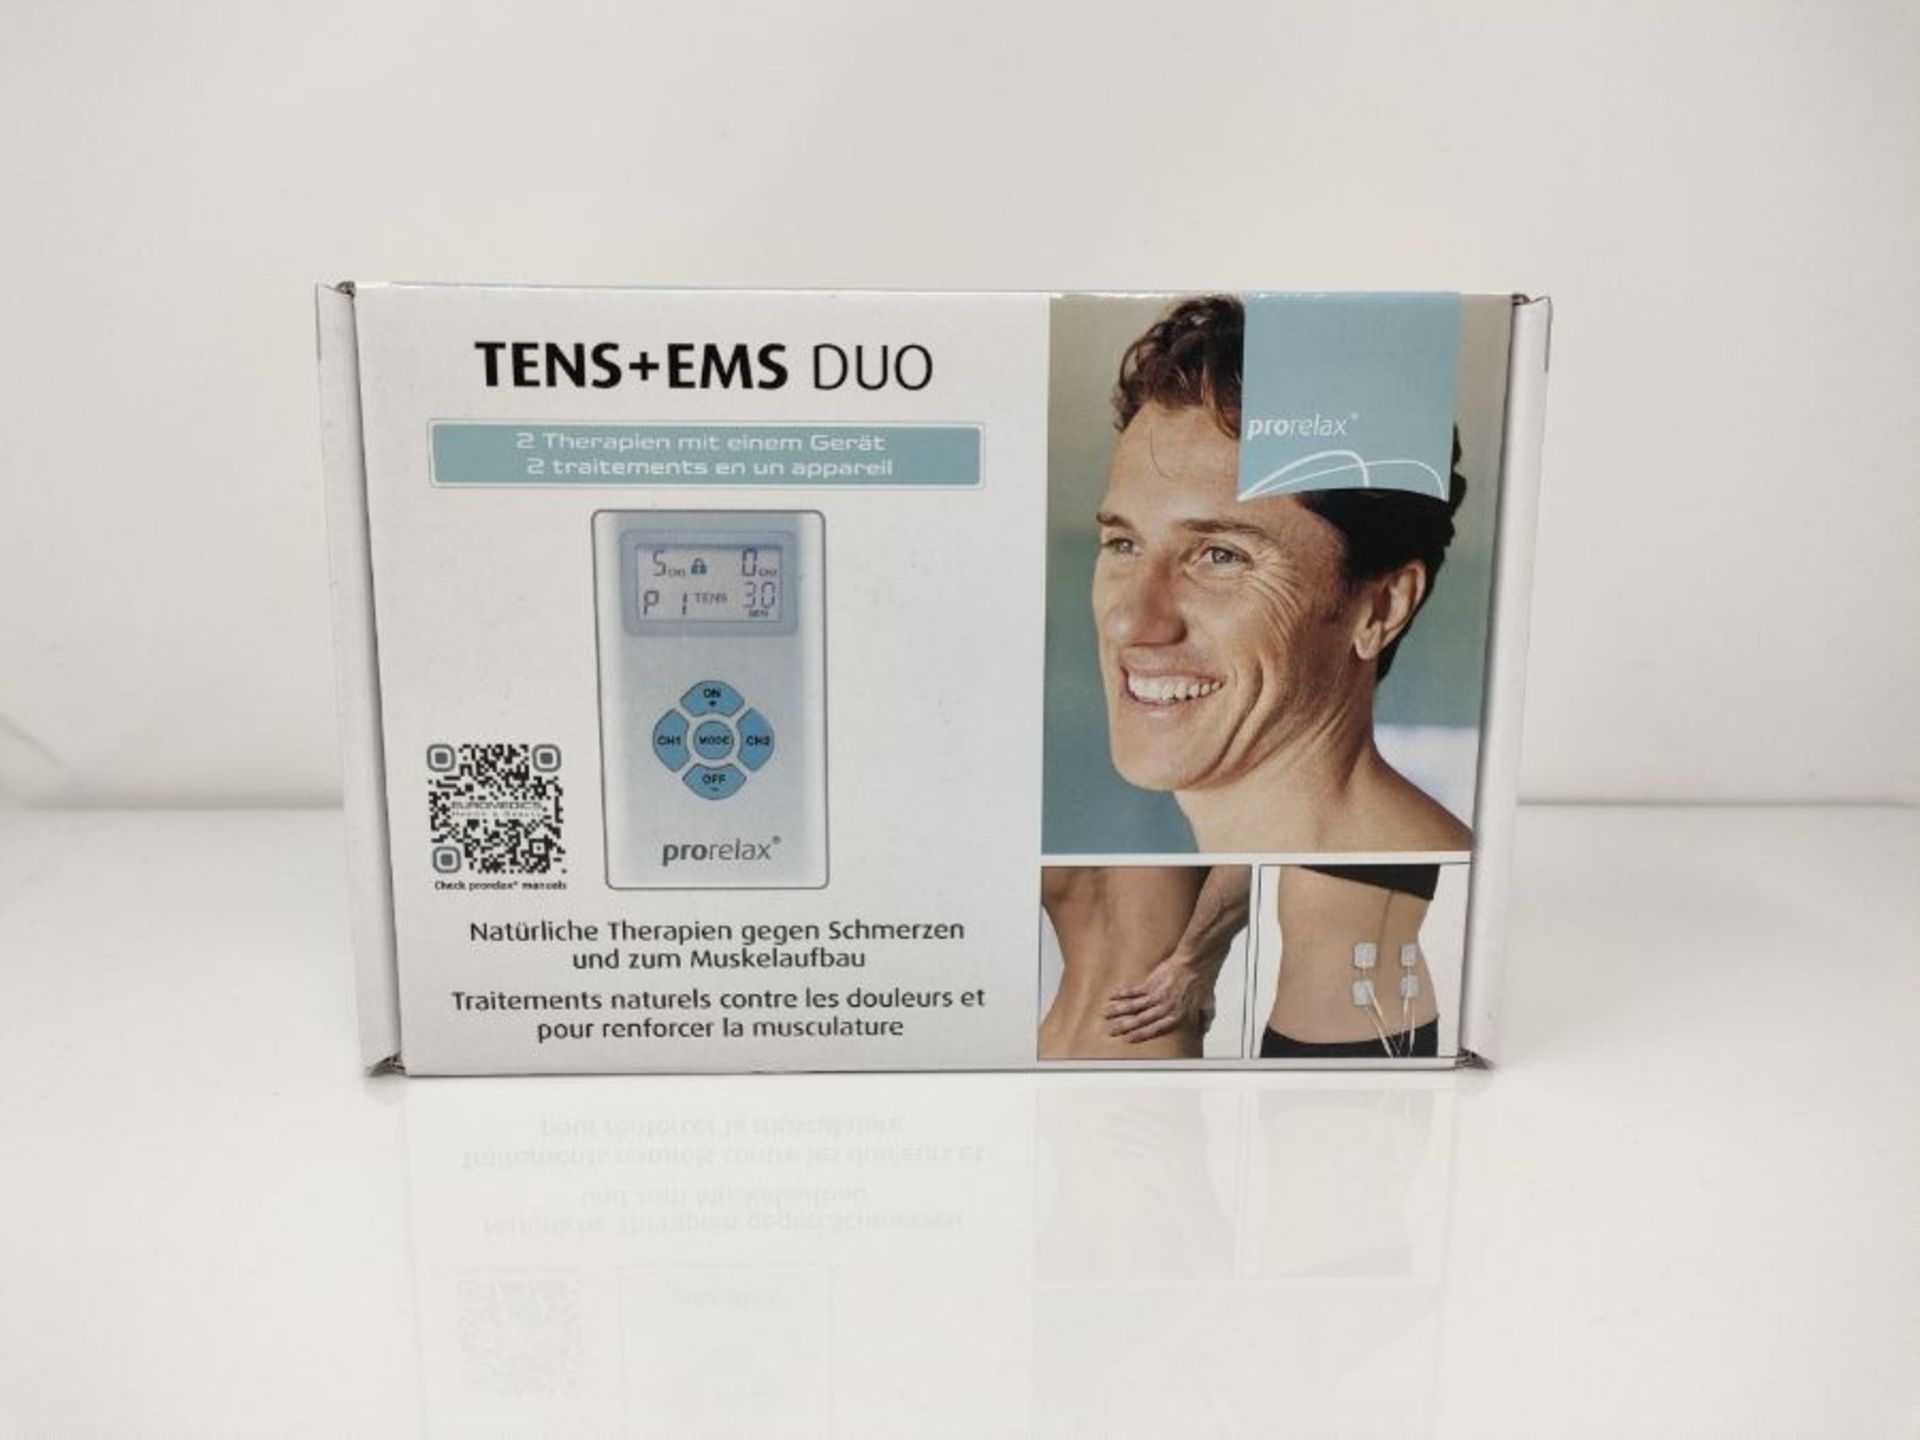 prorelax TENS/EMS Duo | Electrostimulation device | 2 therapies with one device | Natu - Image 2 of 3